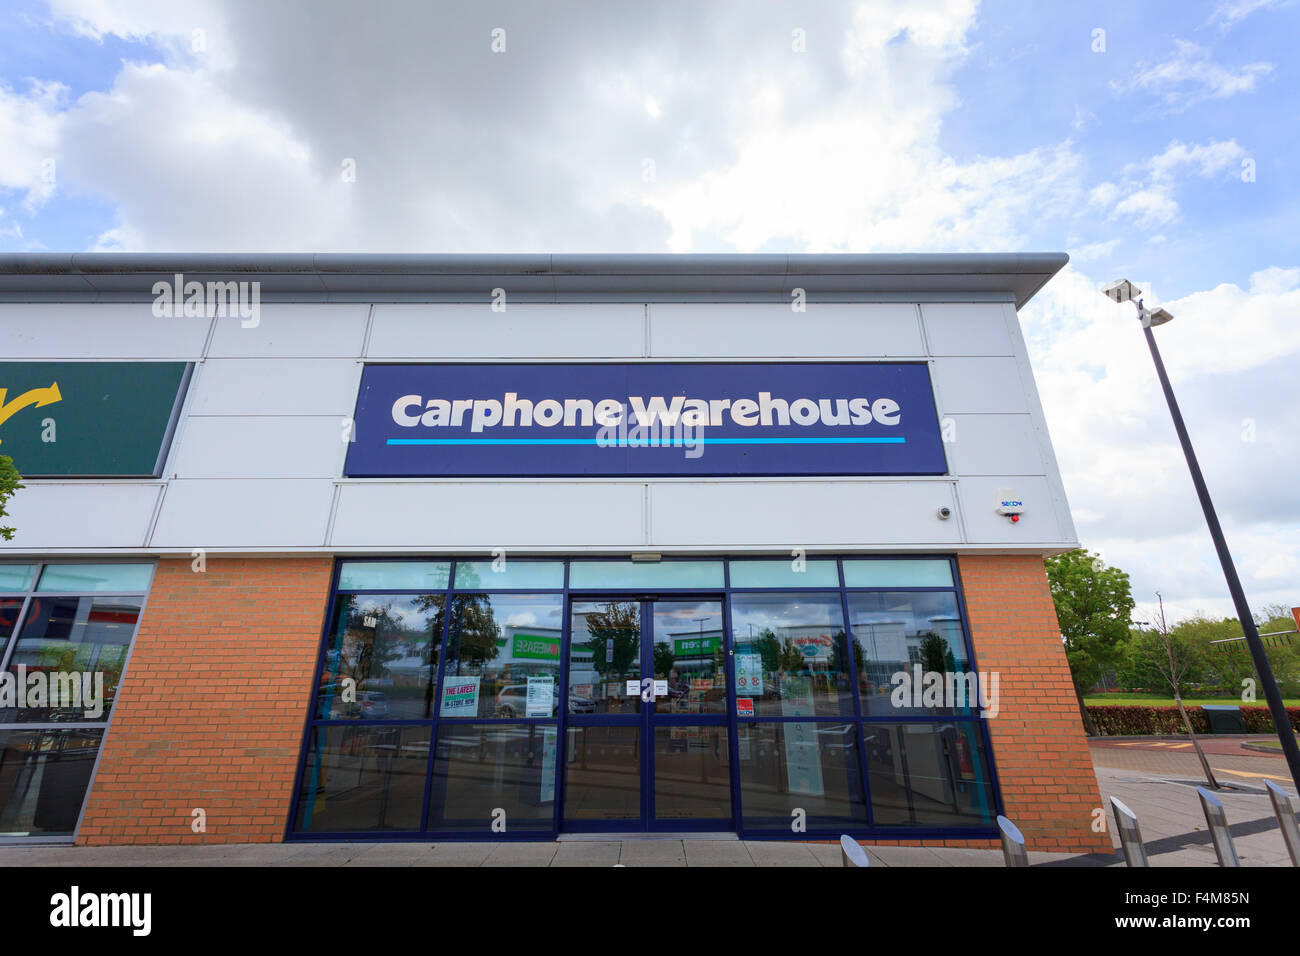 Exterior of Carephone Warehouse store without people Stock Photo